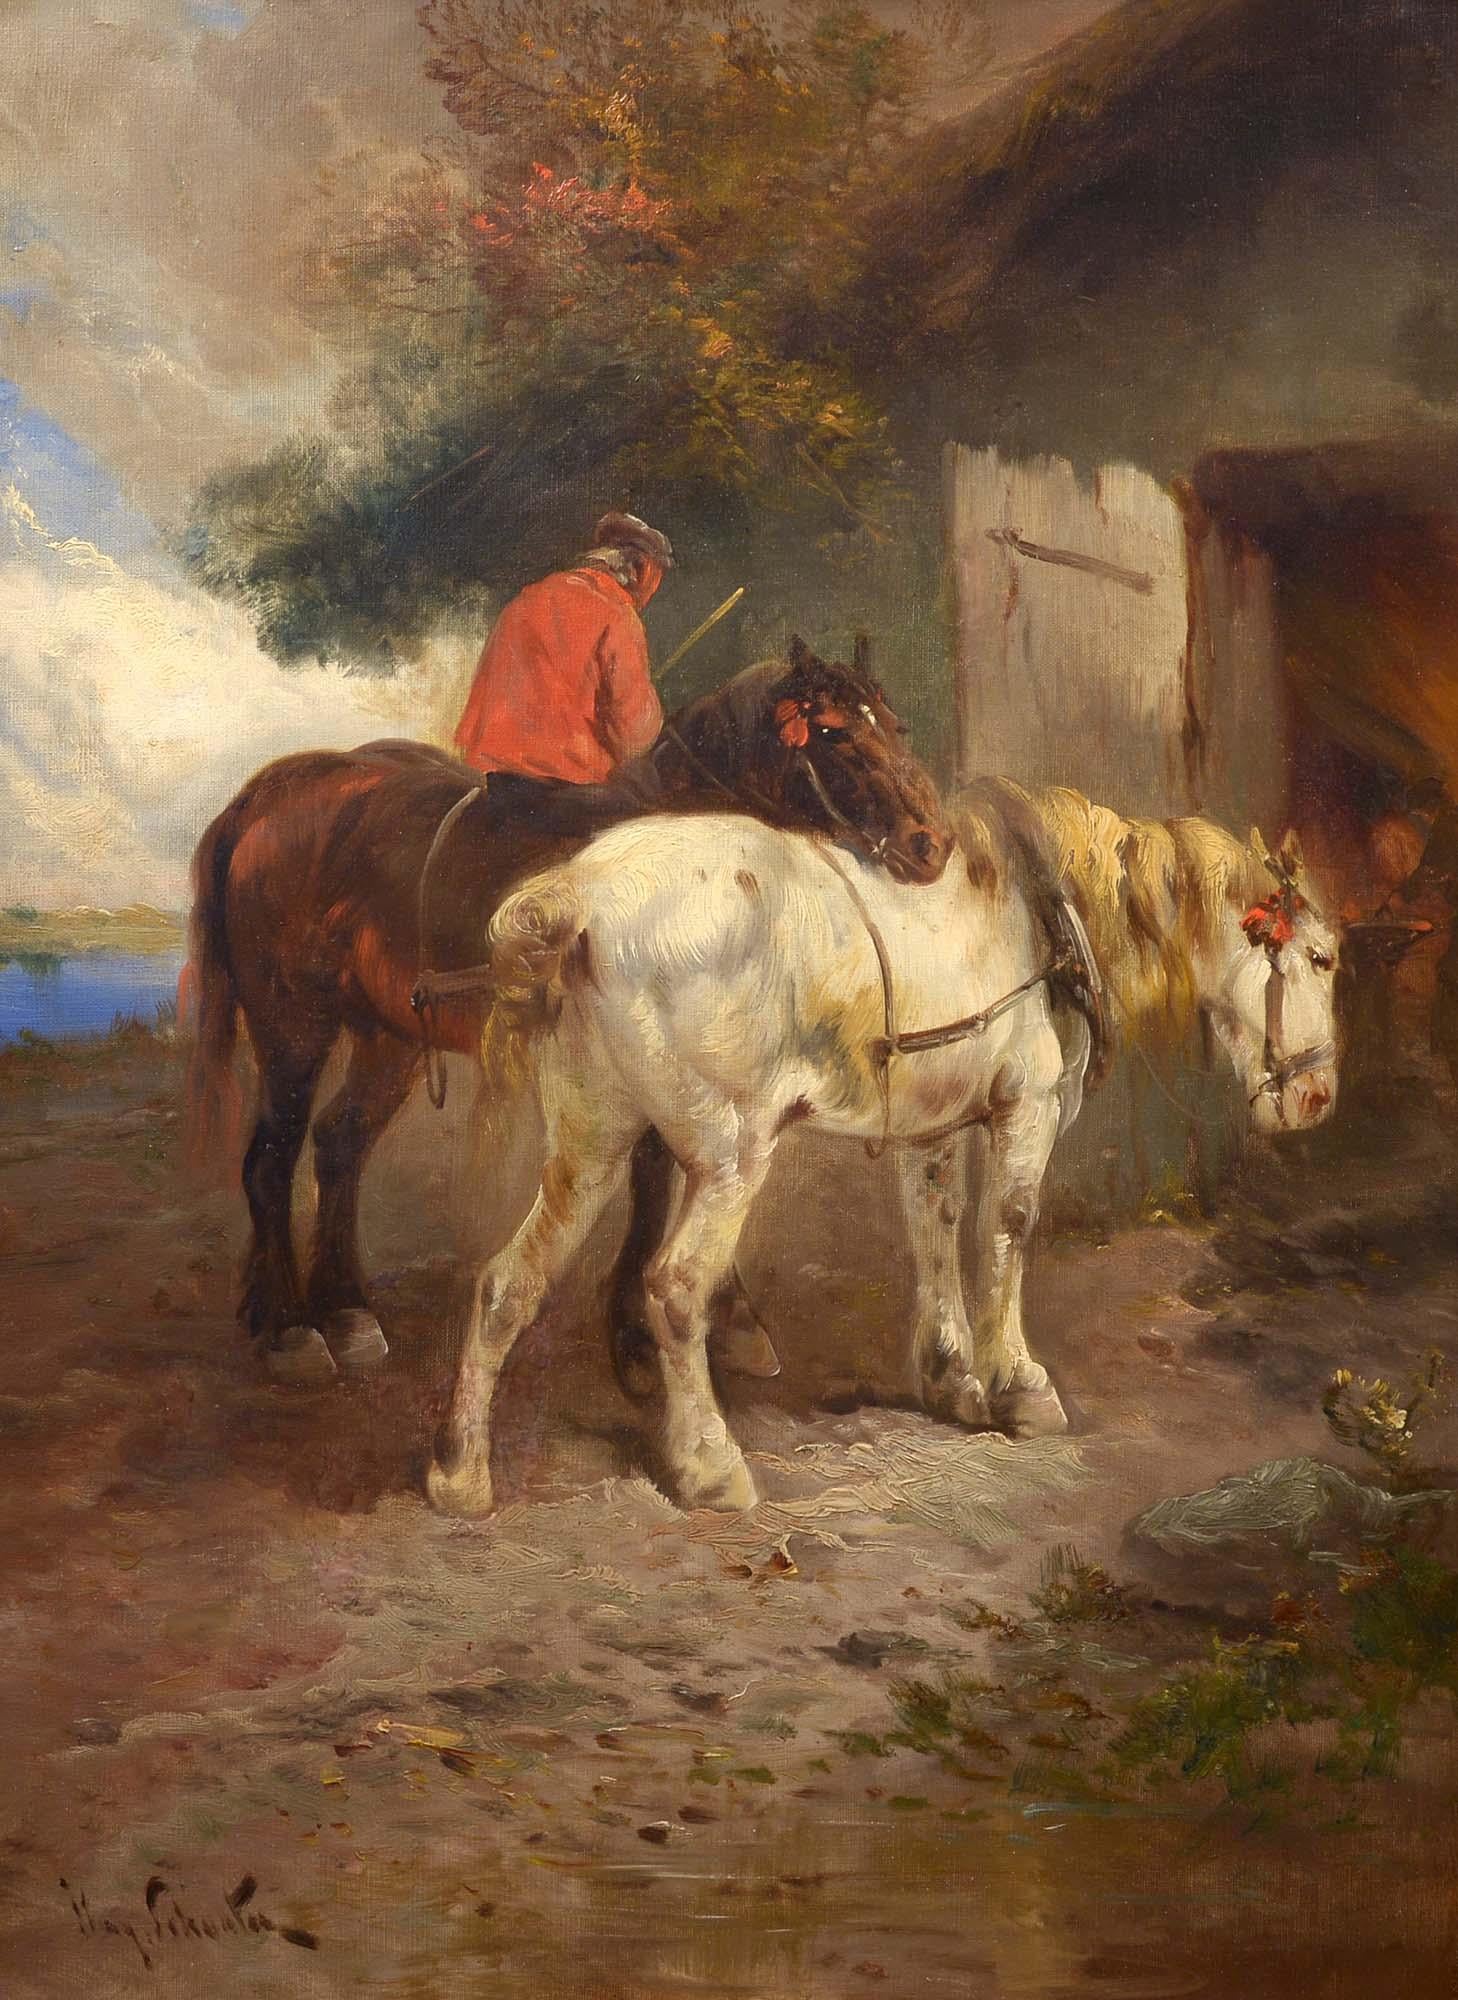 Henry Schouten was a Belgian artist best known for painting farmyard scenes of animals in their environment. Born in 1859 in Indonesia, Schouten went on to study art at the Academy of Brussels from 1876 to 1881. His works were strongly influenced by